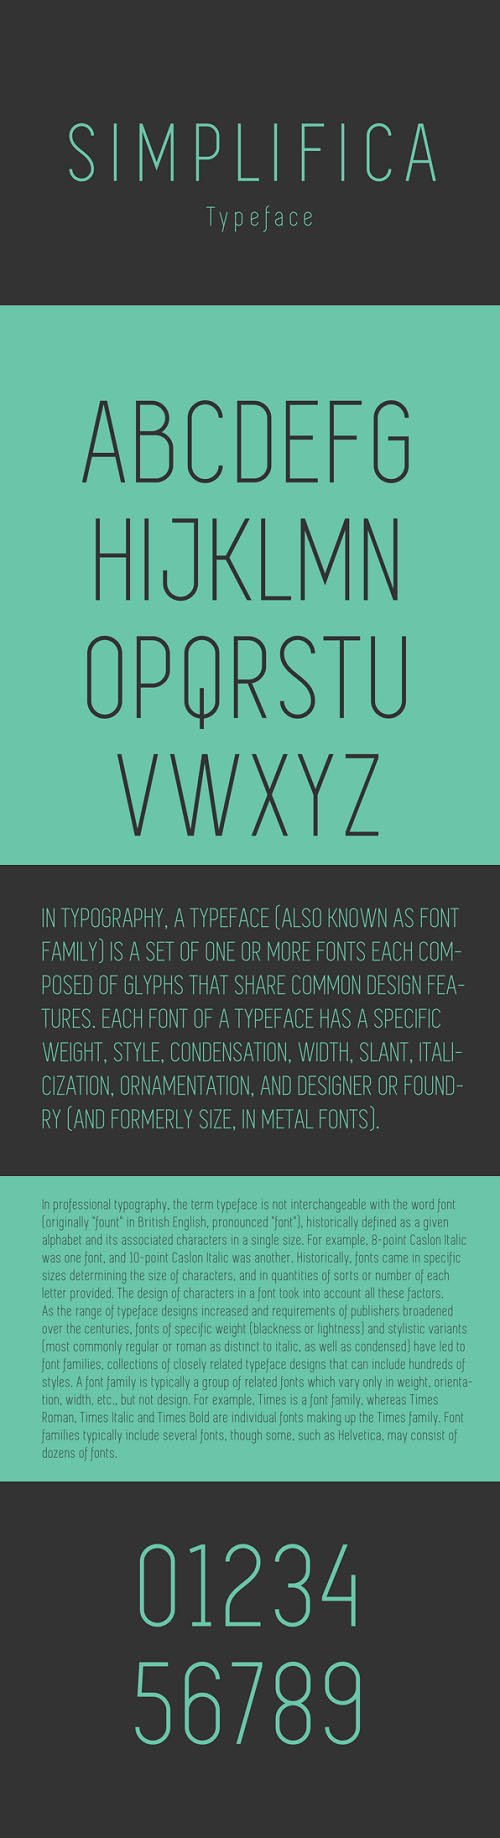 Simplfica Font Style